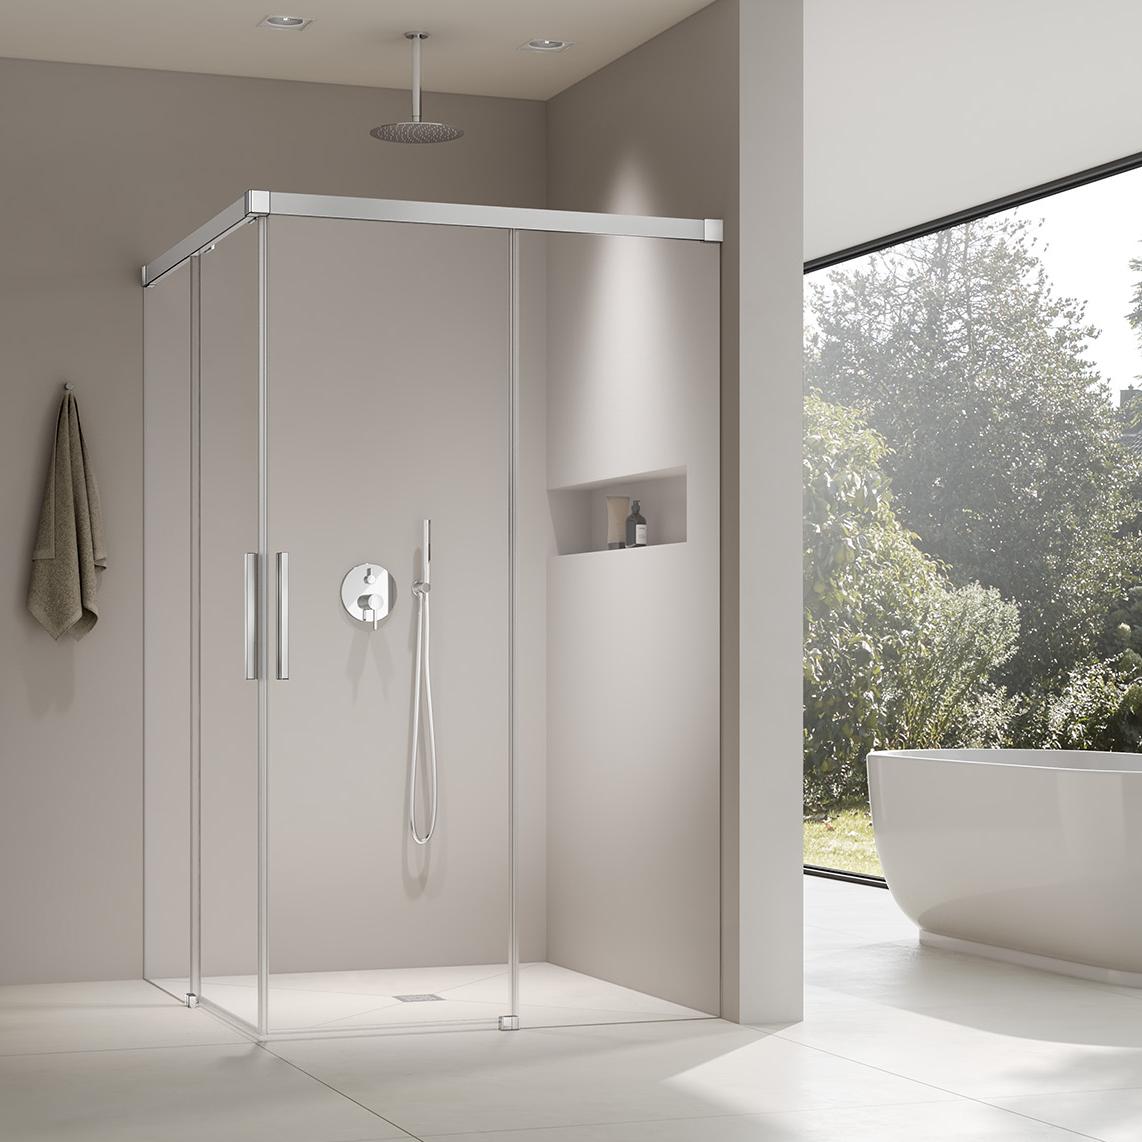 Kermi profile shower enclosure NICA two-part corner entry (off-floor sliding doors) without wall profile